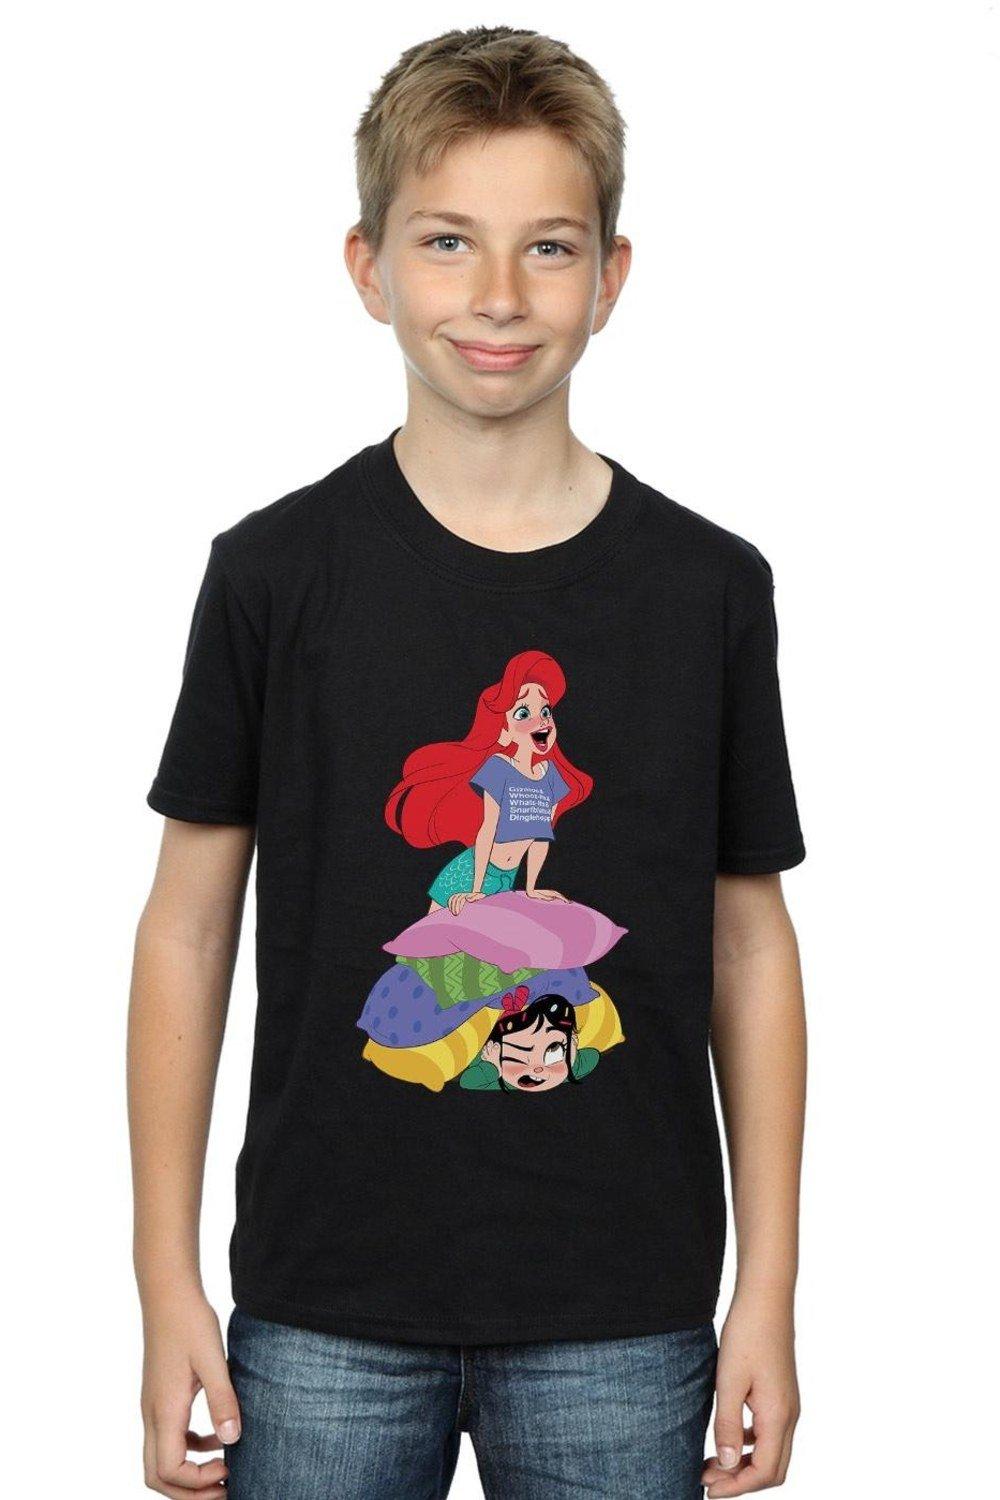 Wreck It Ralph Ariel And Vanellope T-Shirt